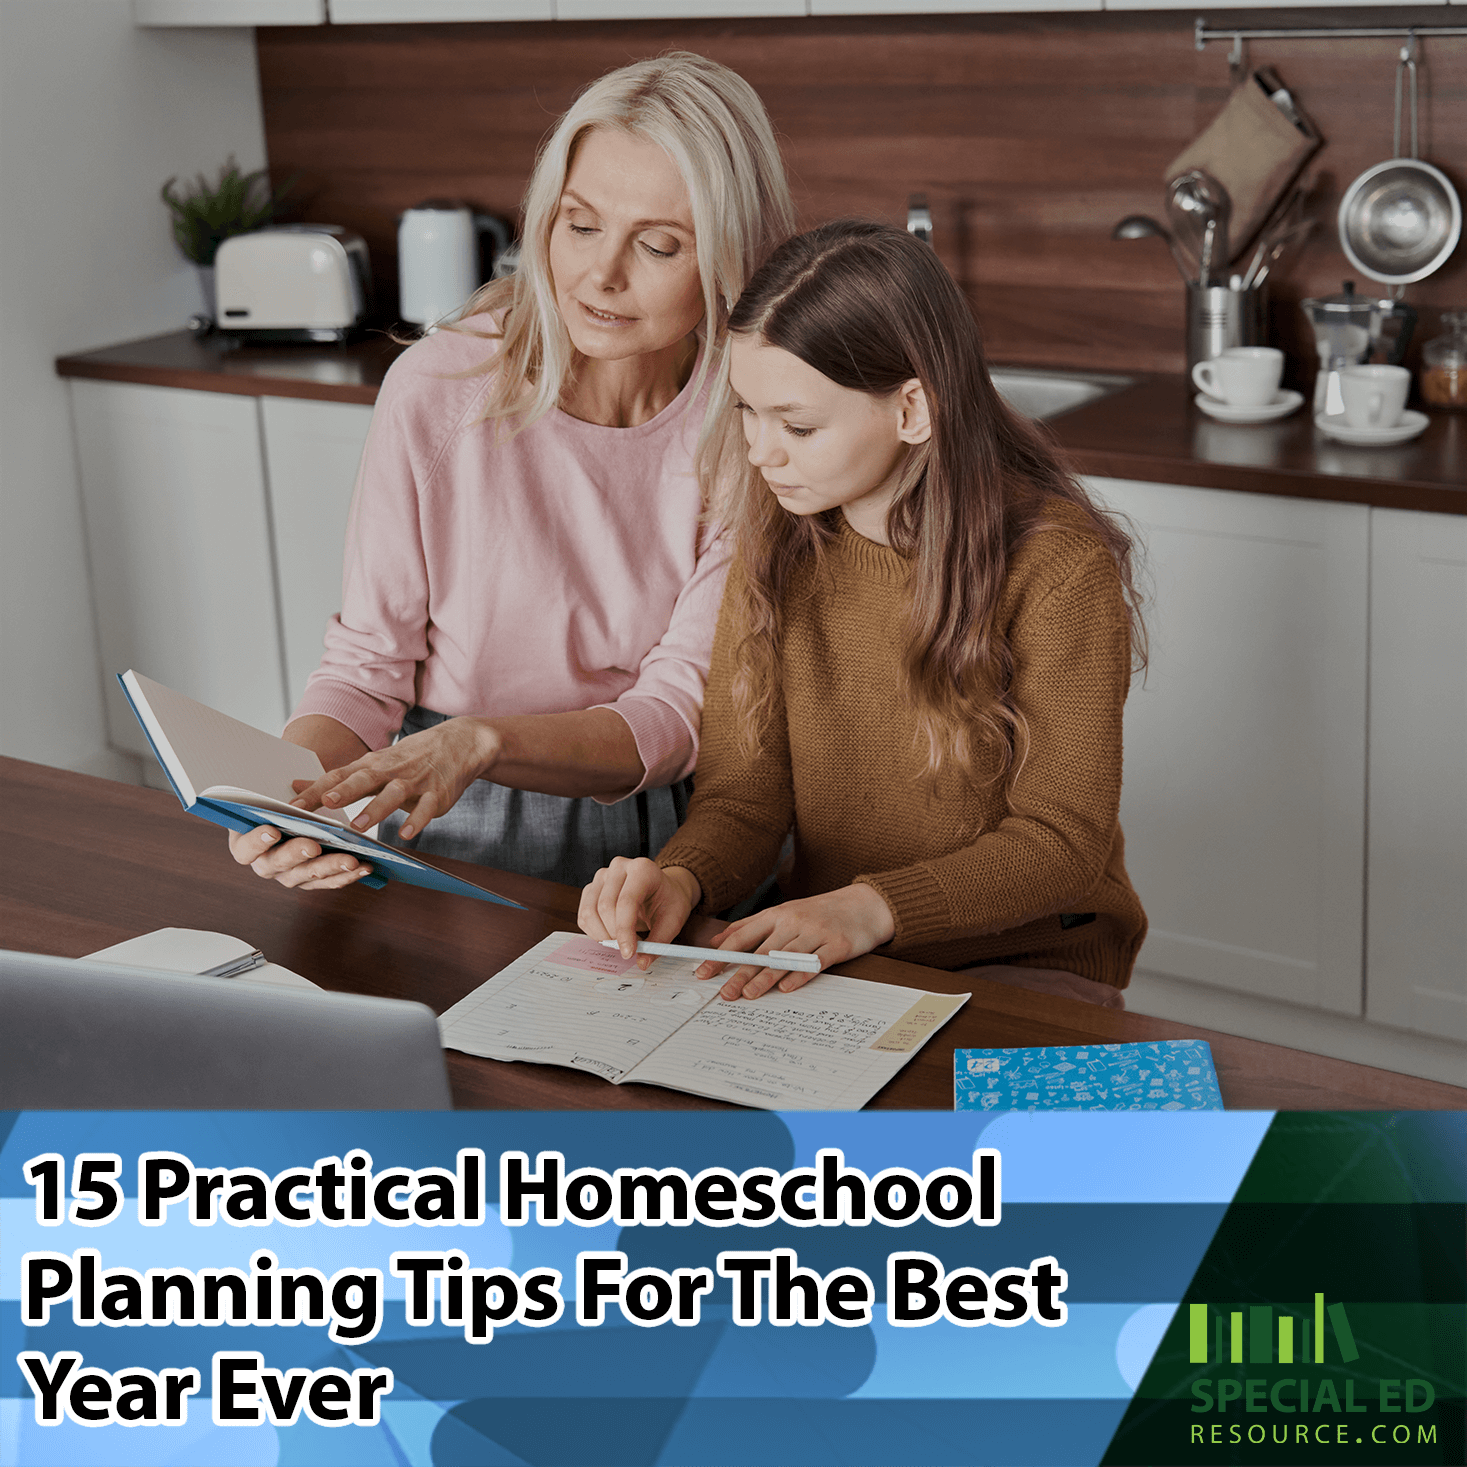 Mom and daughter homeschooling in the kitchen after reading these 15 practical homeschooling planning tips.